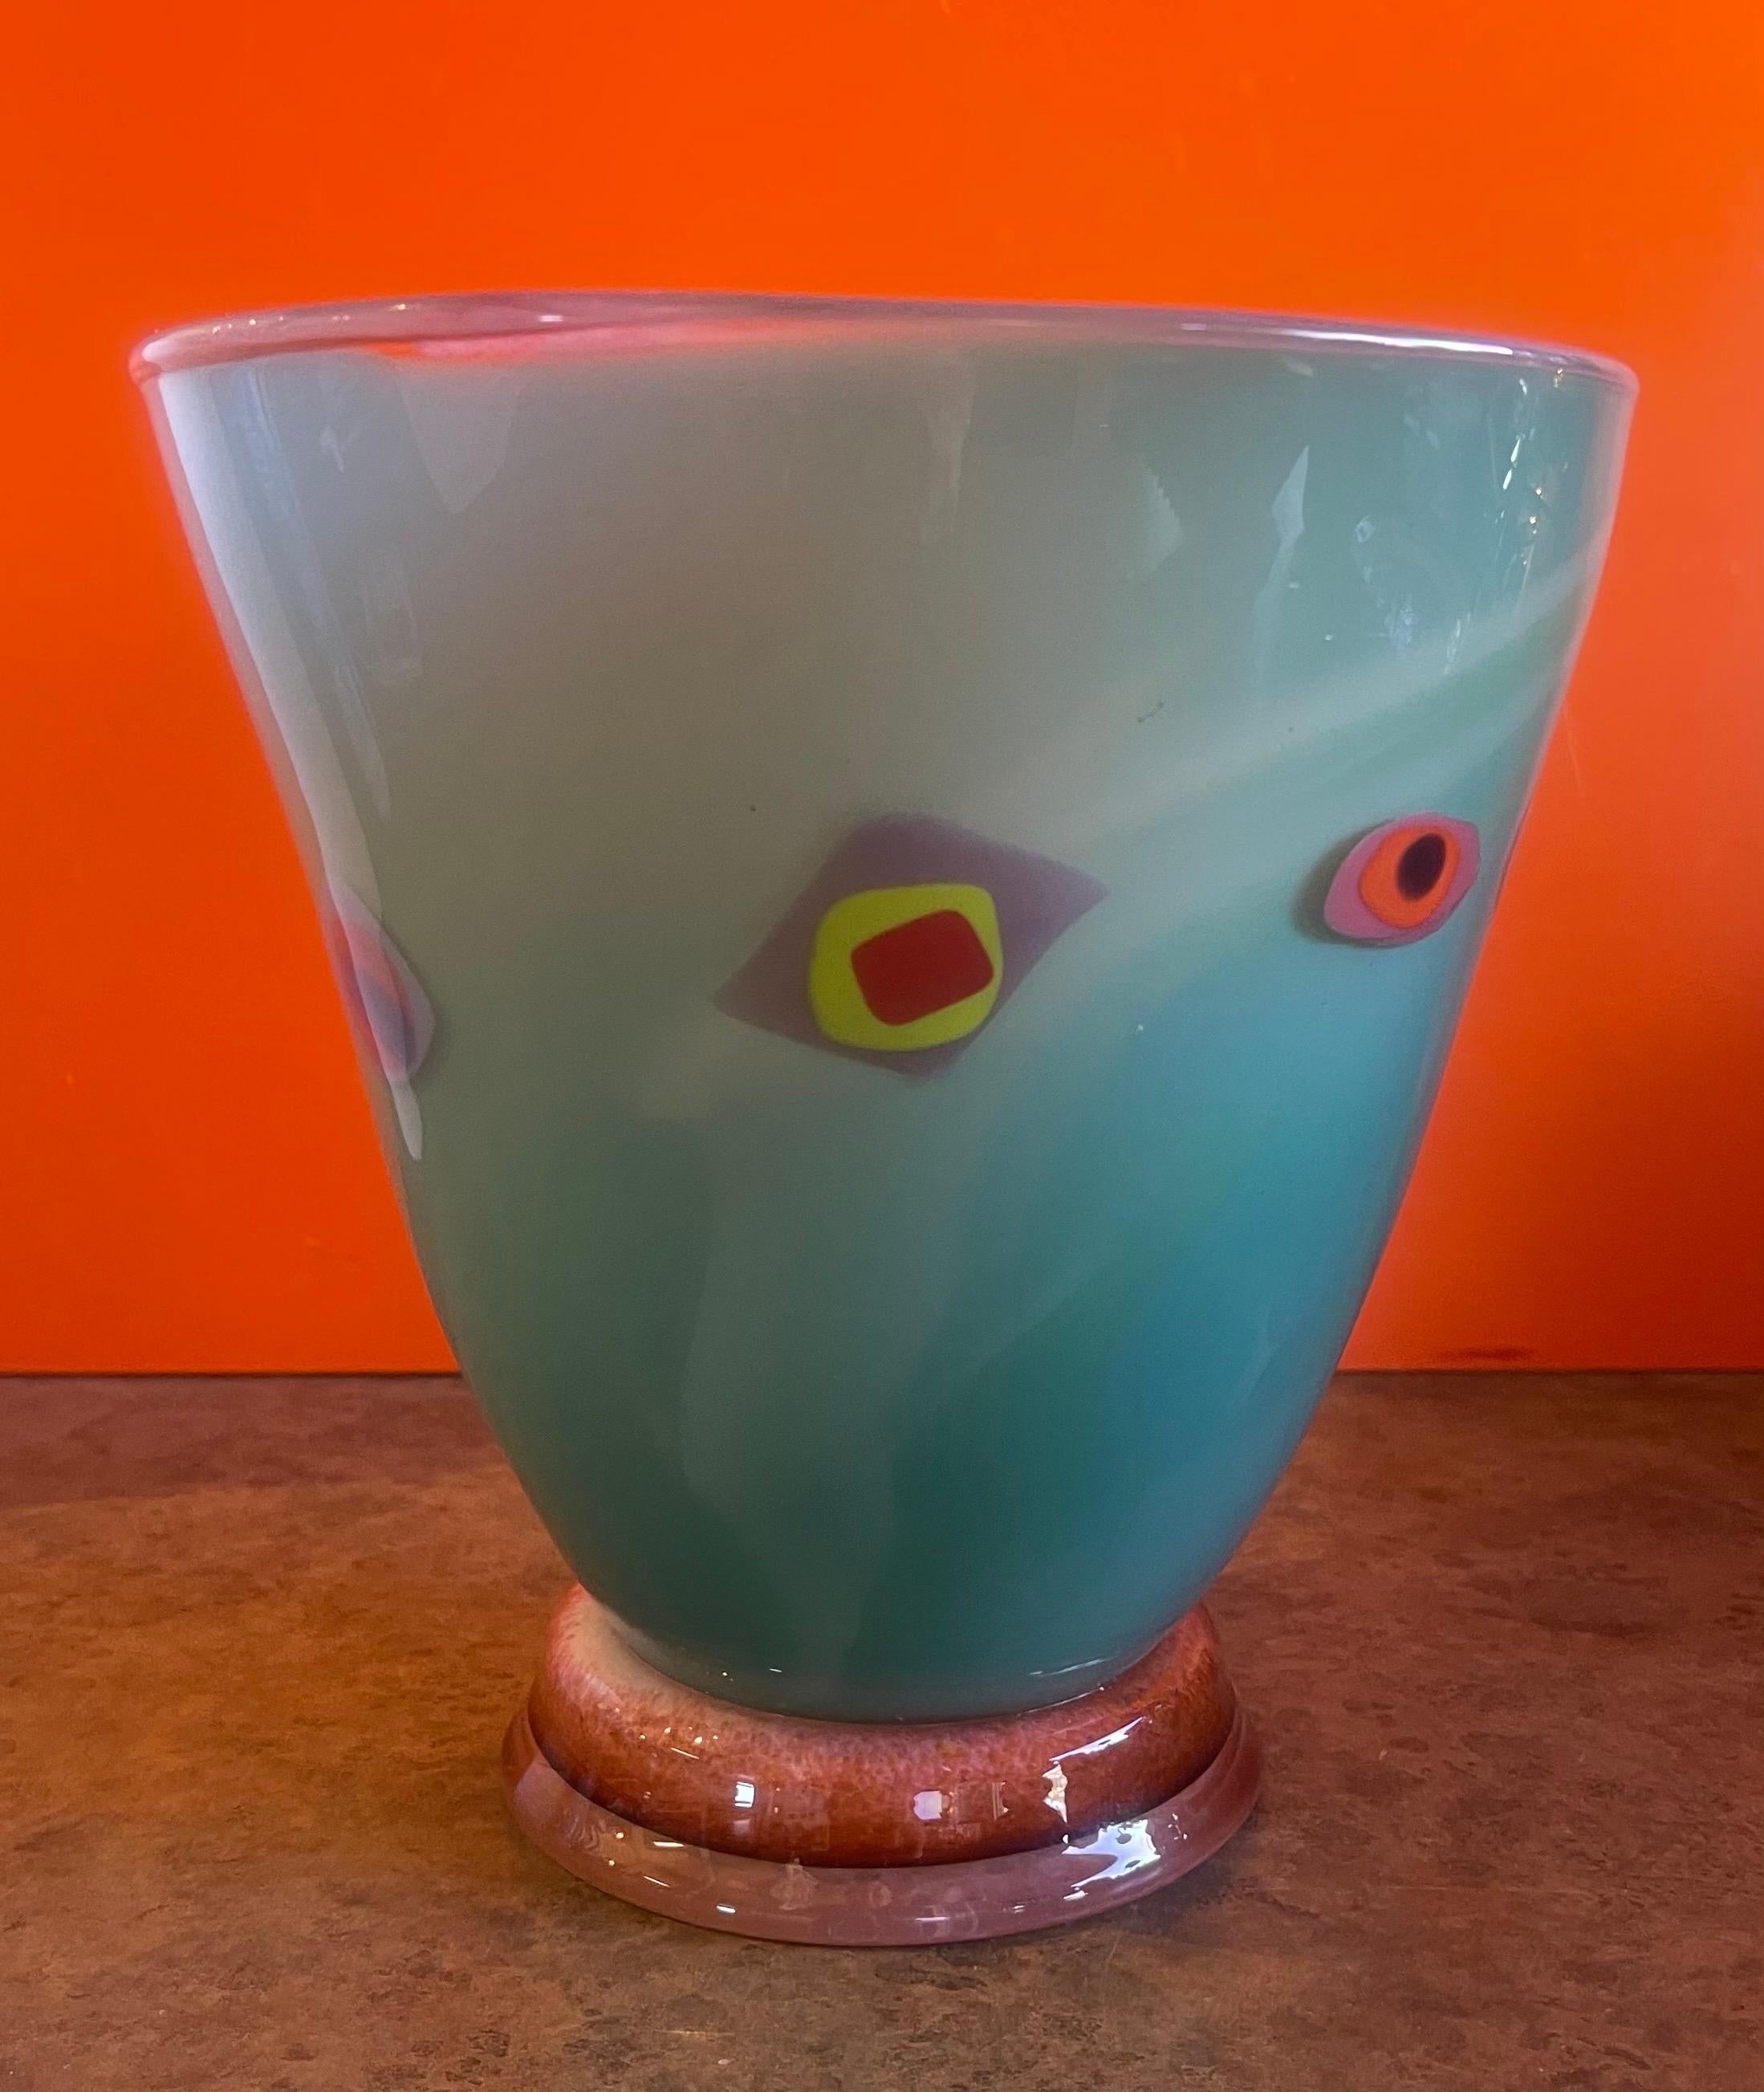 Gorgeous post-modern art glass vase by Jon Oakes, circa 1980s. This vase is in very good vintage condition with no chips or cracks and measures 8.25